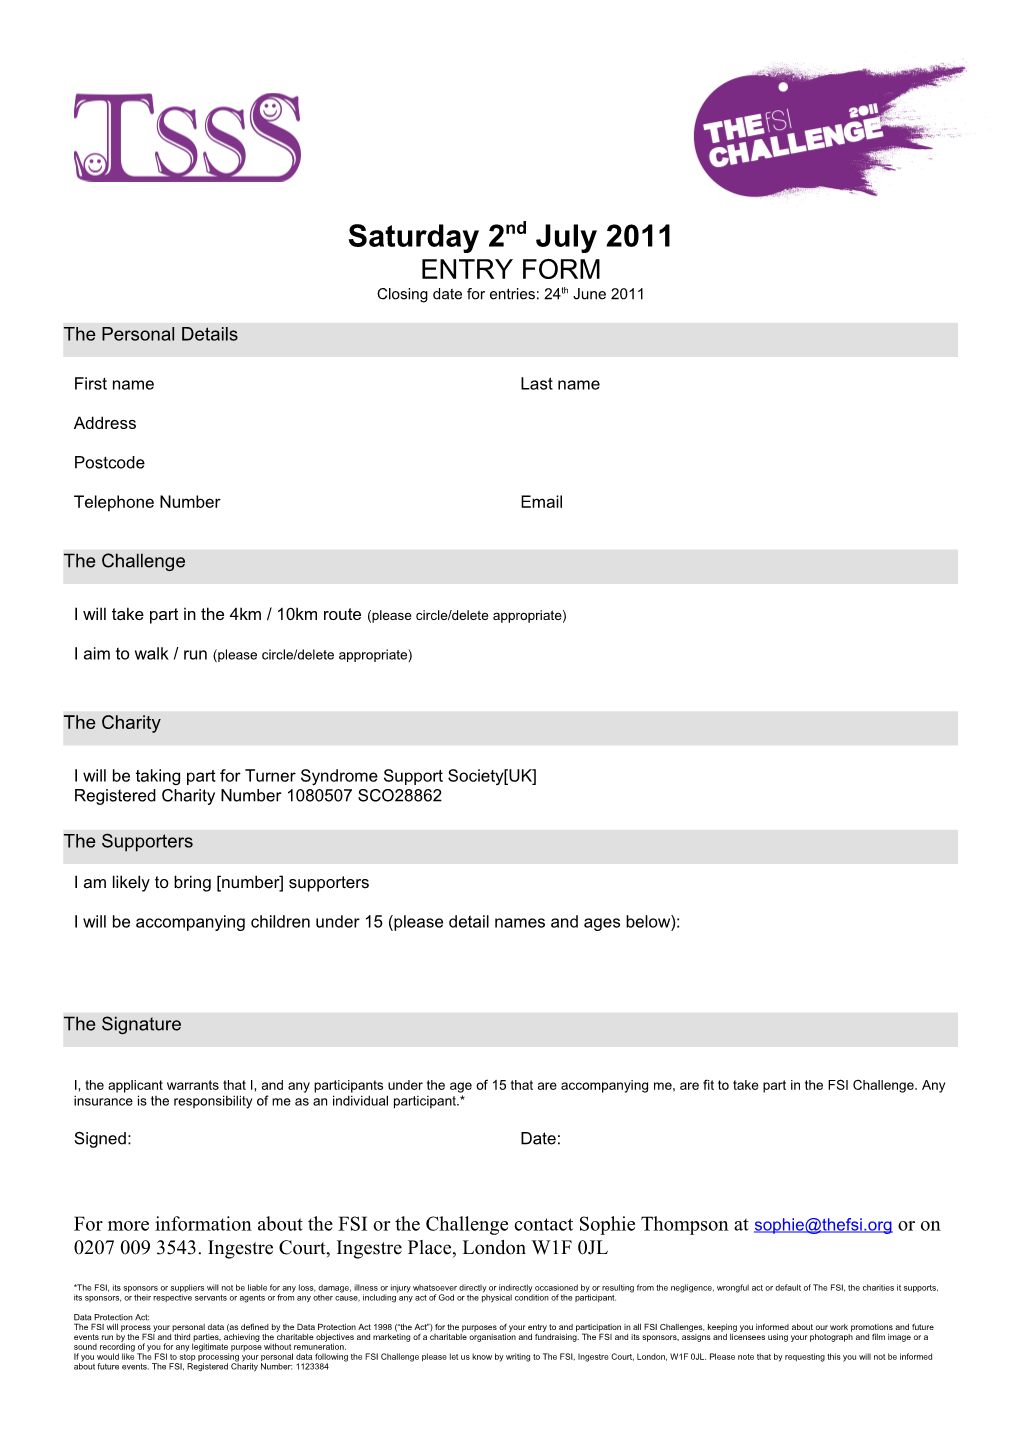 Closing Date for Entries: 24Th June 2011